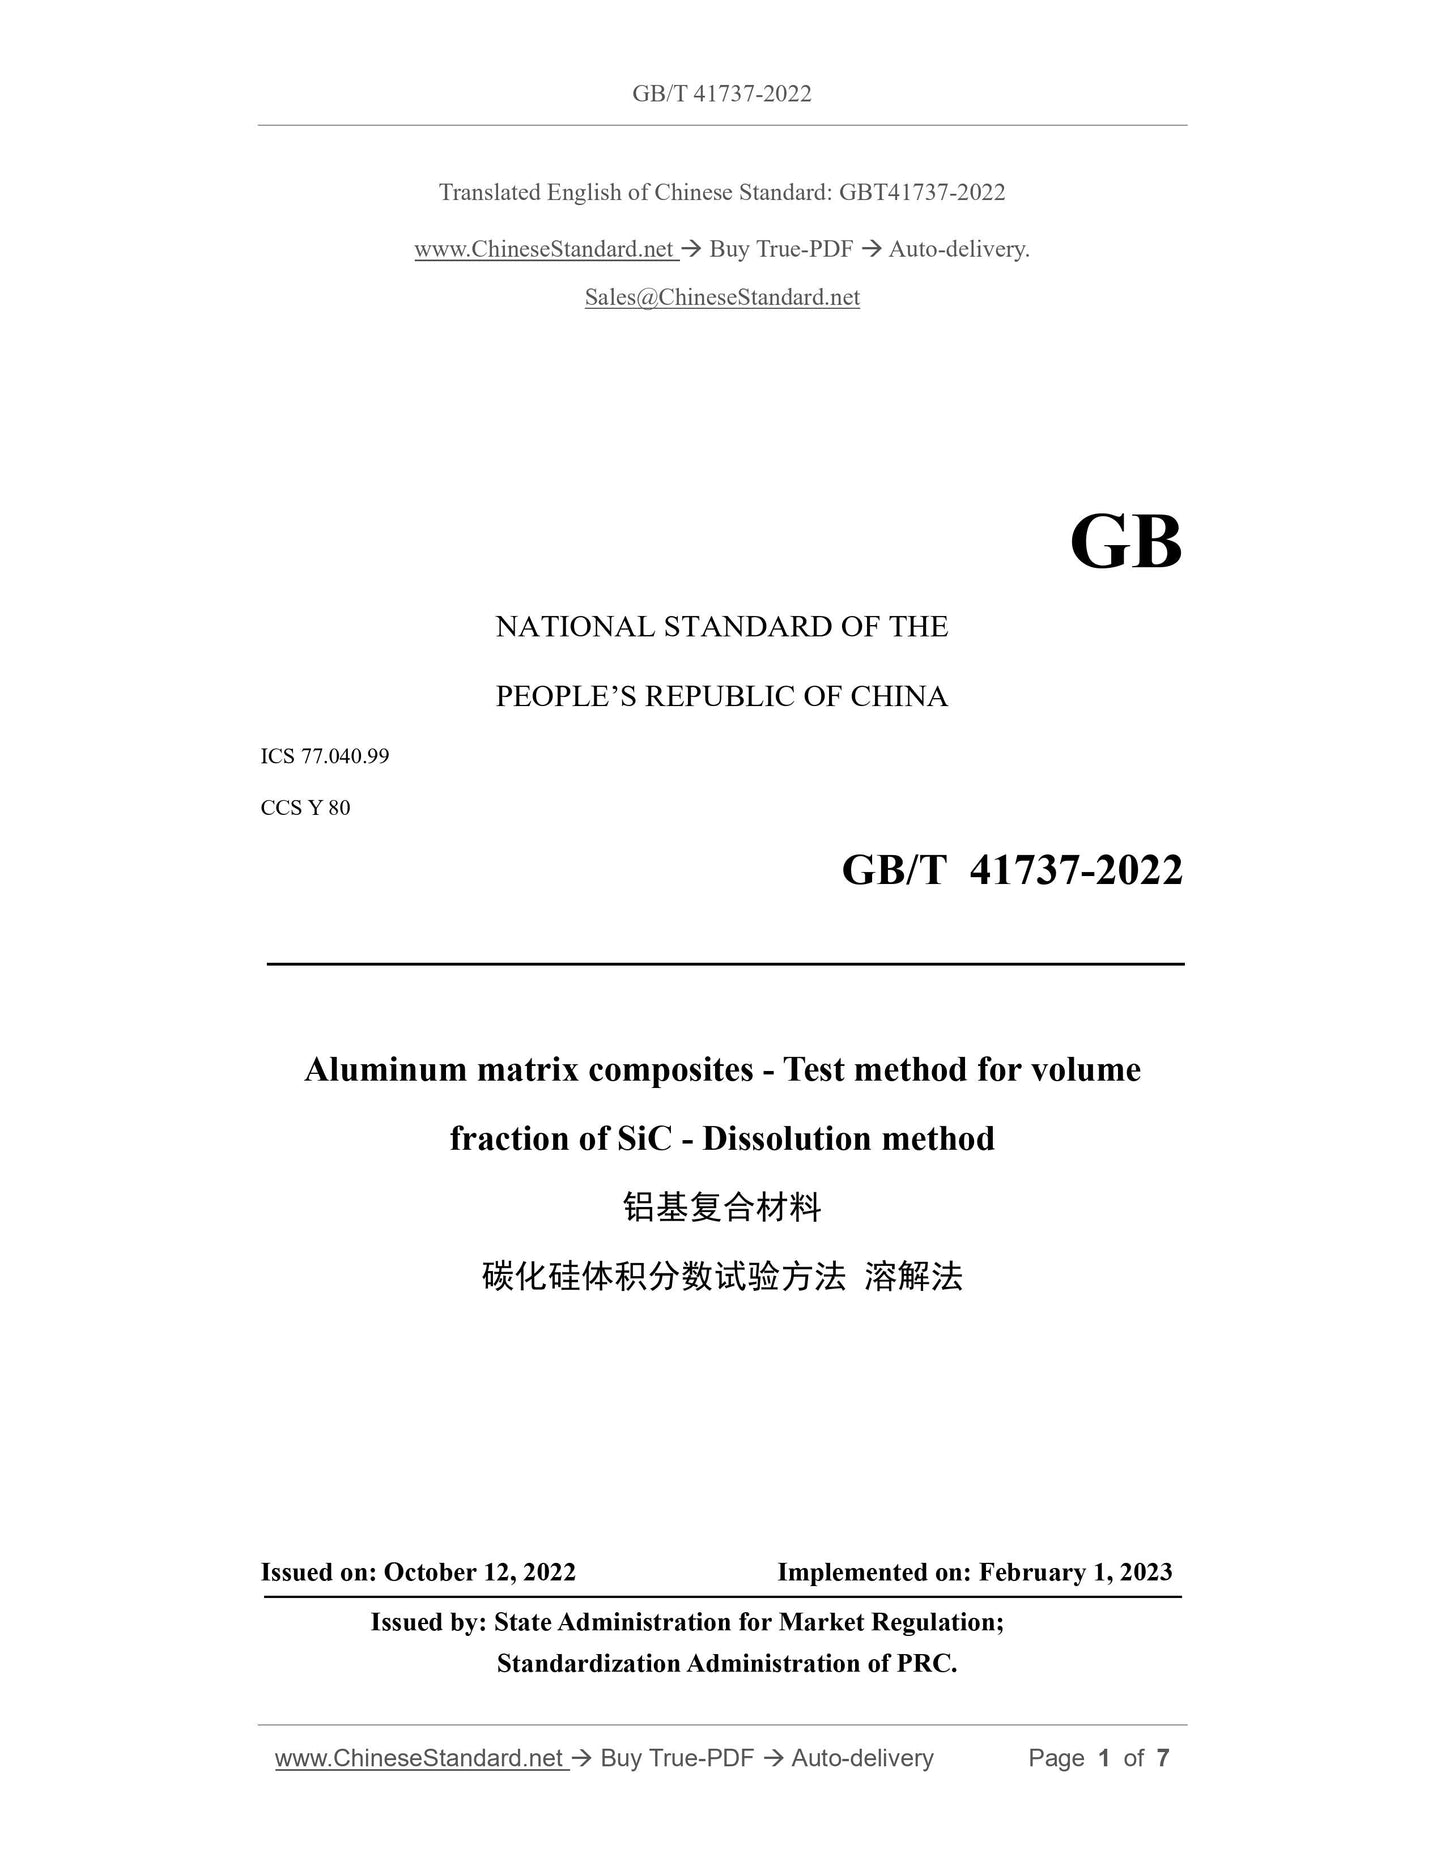 GB/T 41737-2022 Page 1